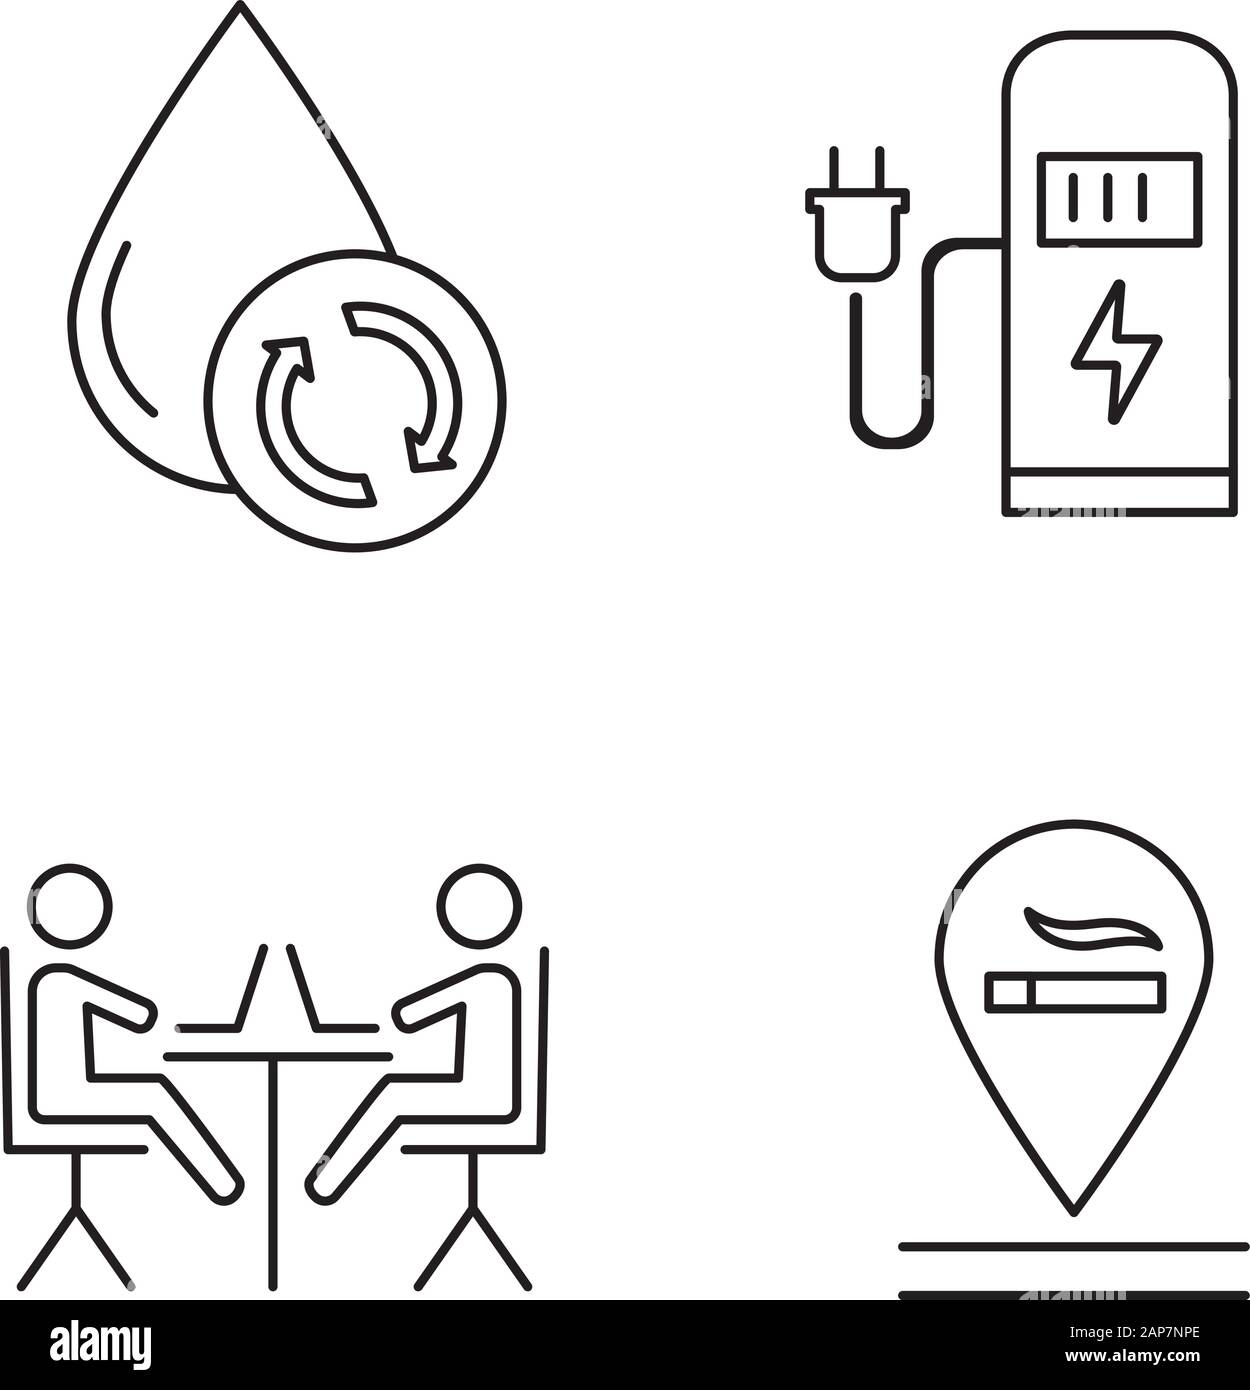 Apartment amenities linear icons set. Water filtration, car charging station, coworking space, smoking allowed. Thin line contour symbols. Isolated ve Stock Vector